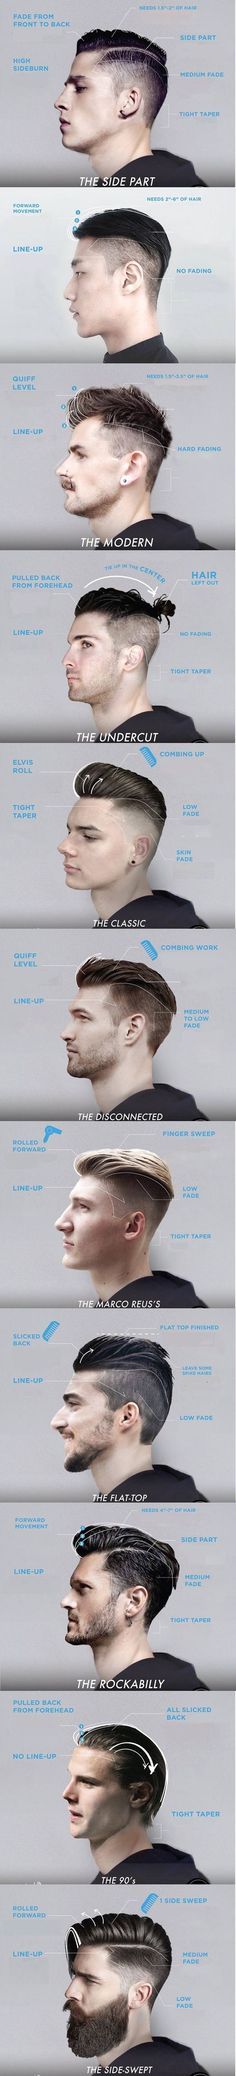 Here's a list of popular styles that we are seeing a lot on men all over soc...